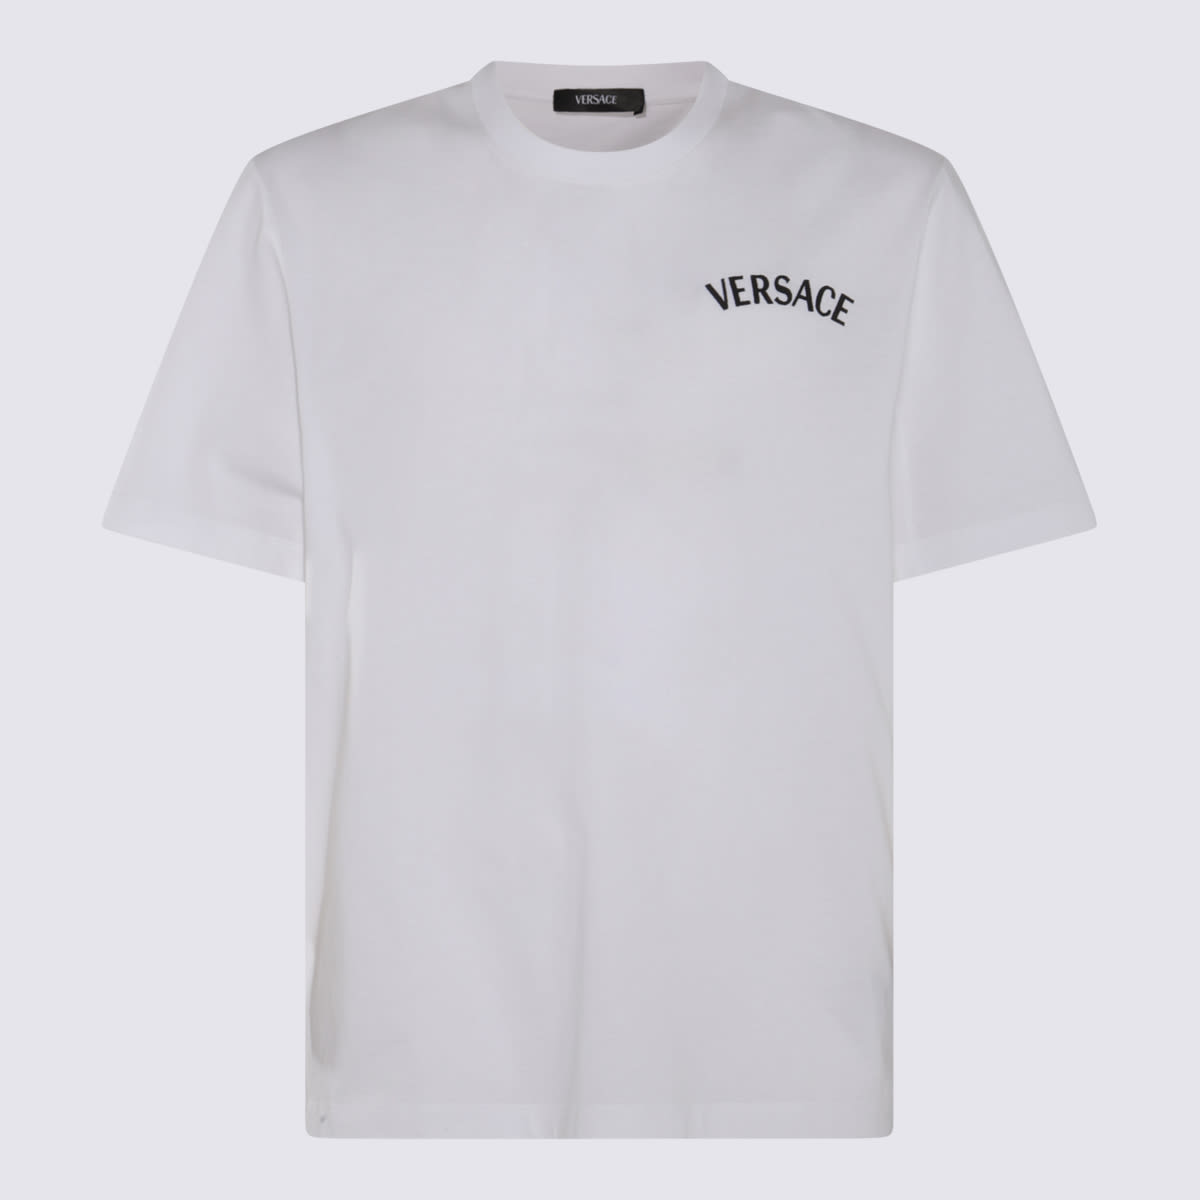 Versace White And Black Cotton T-shirt